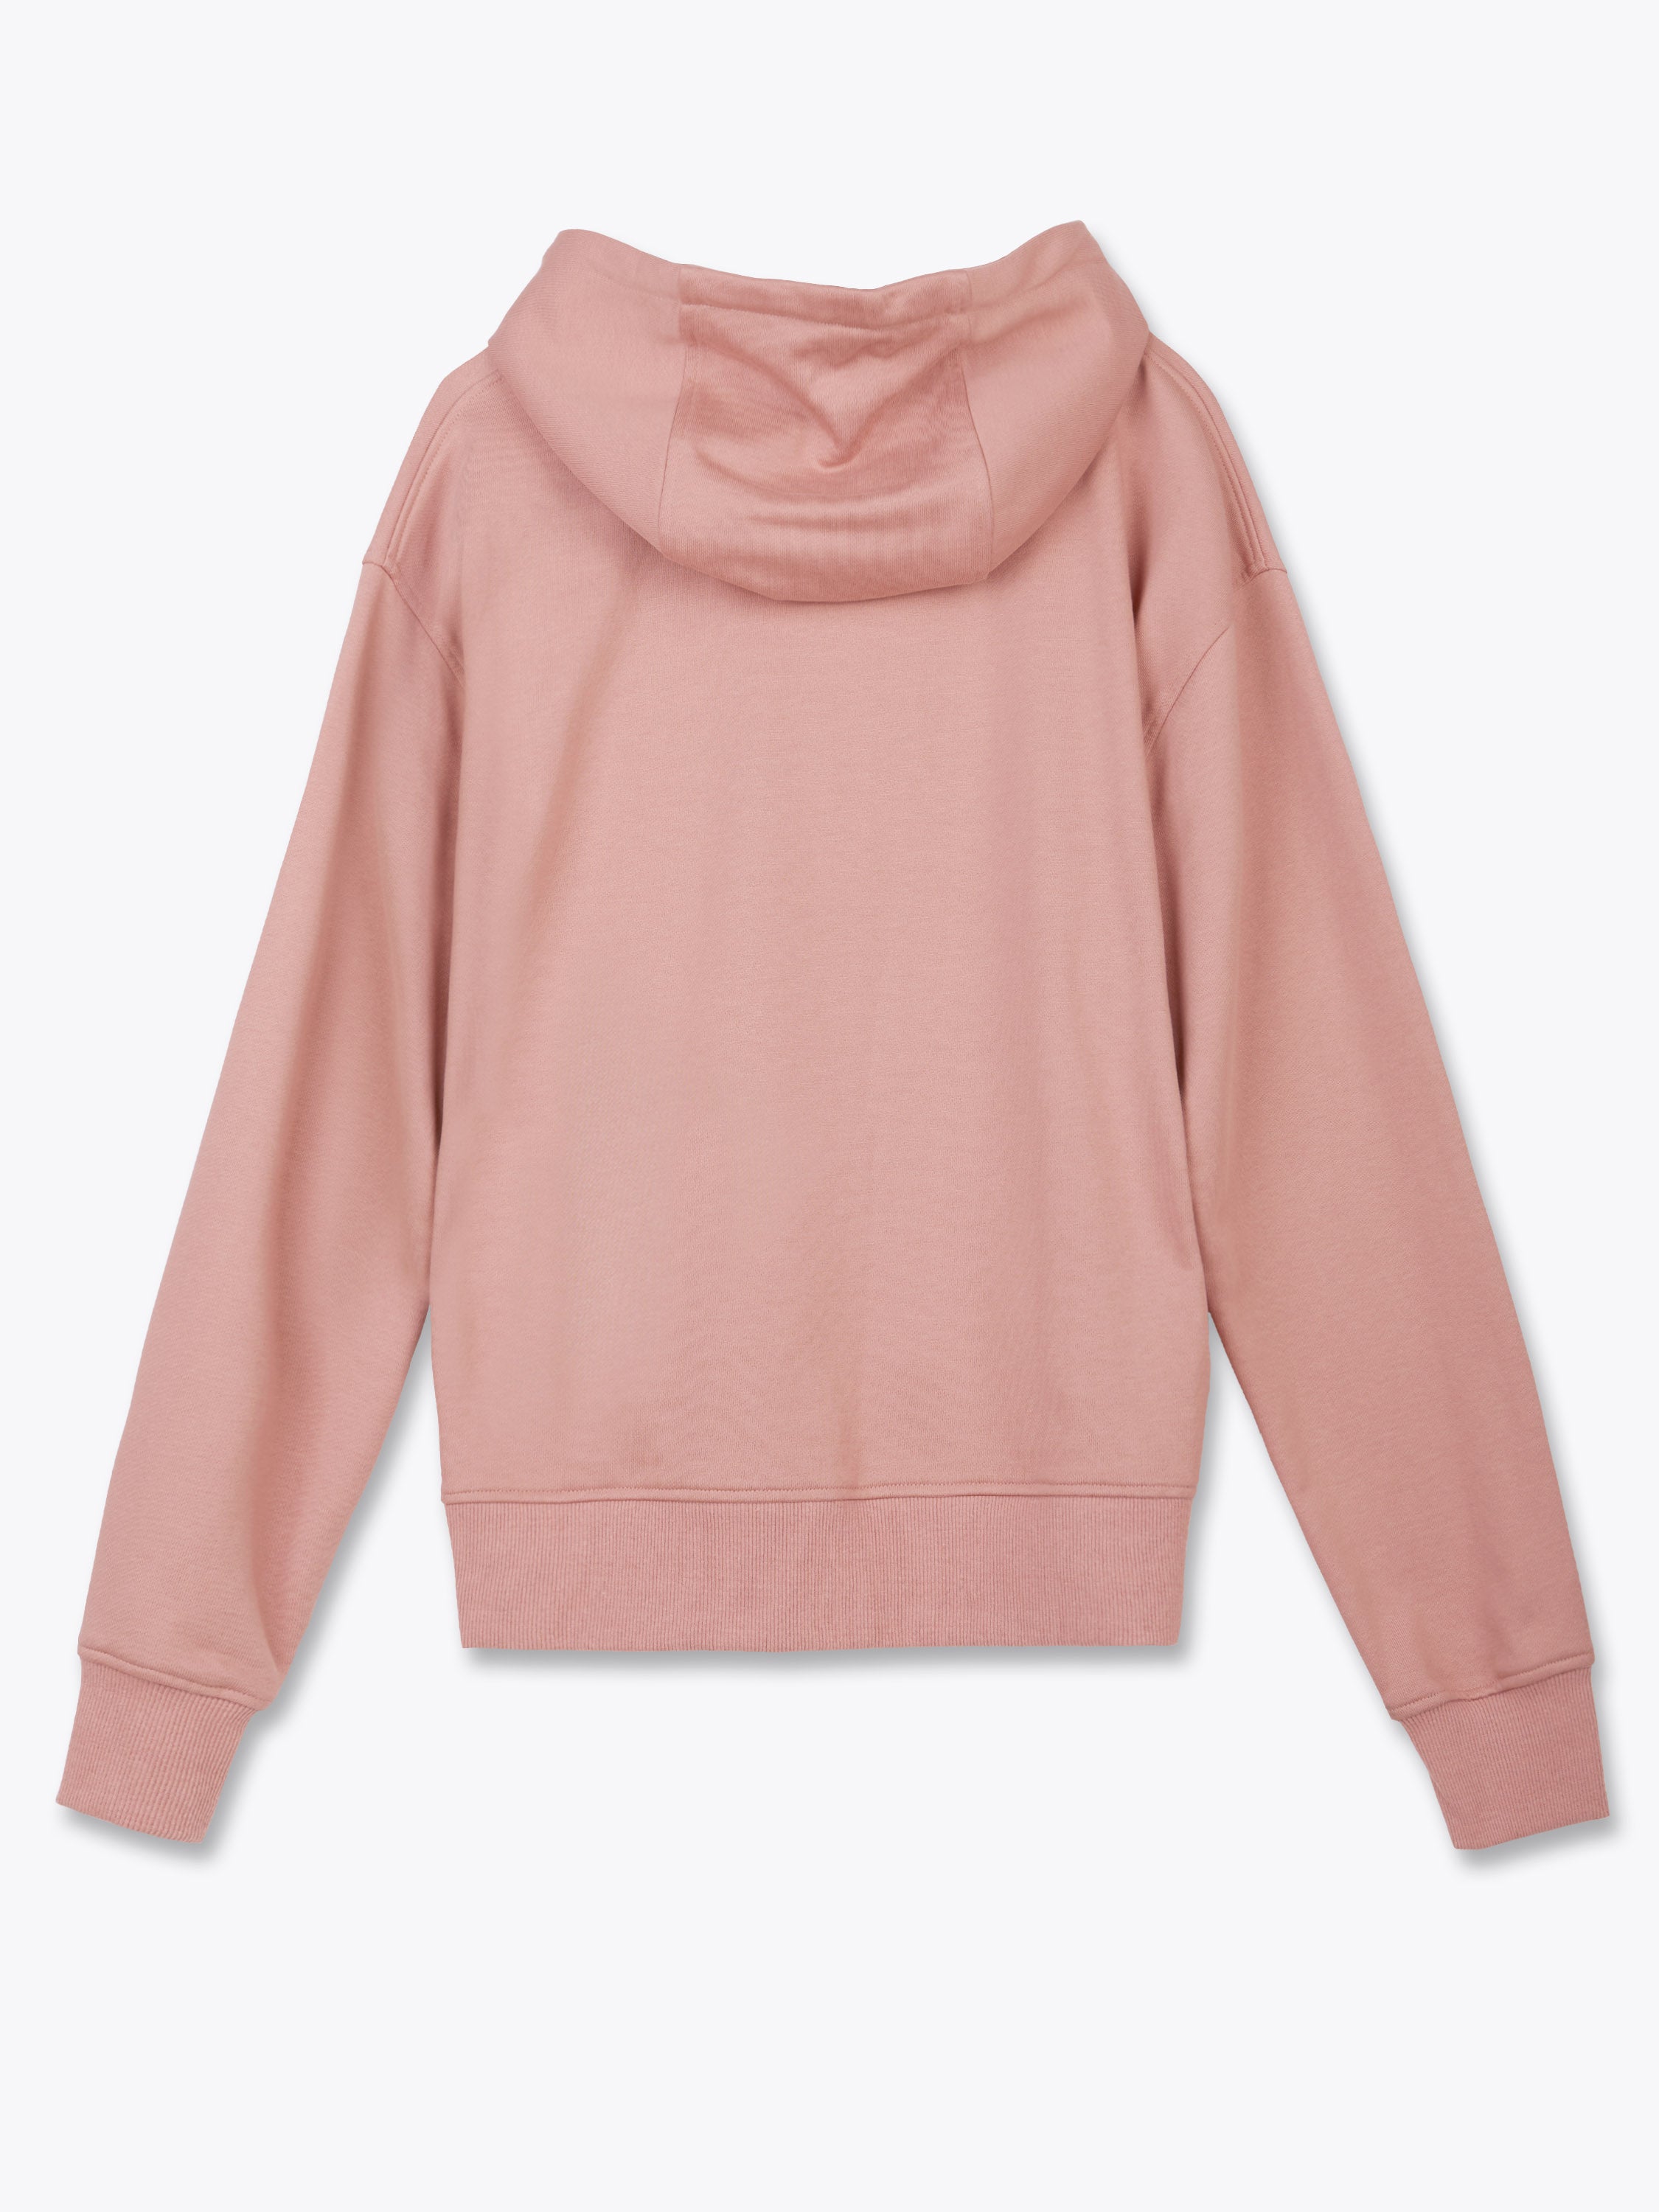 Oversized Unisex Hoodie in Apricot